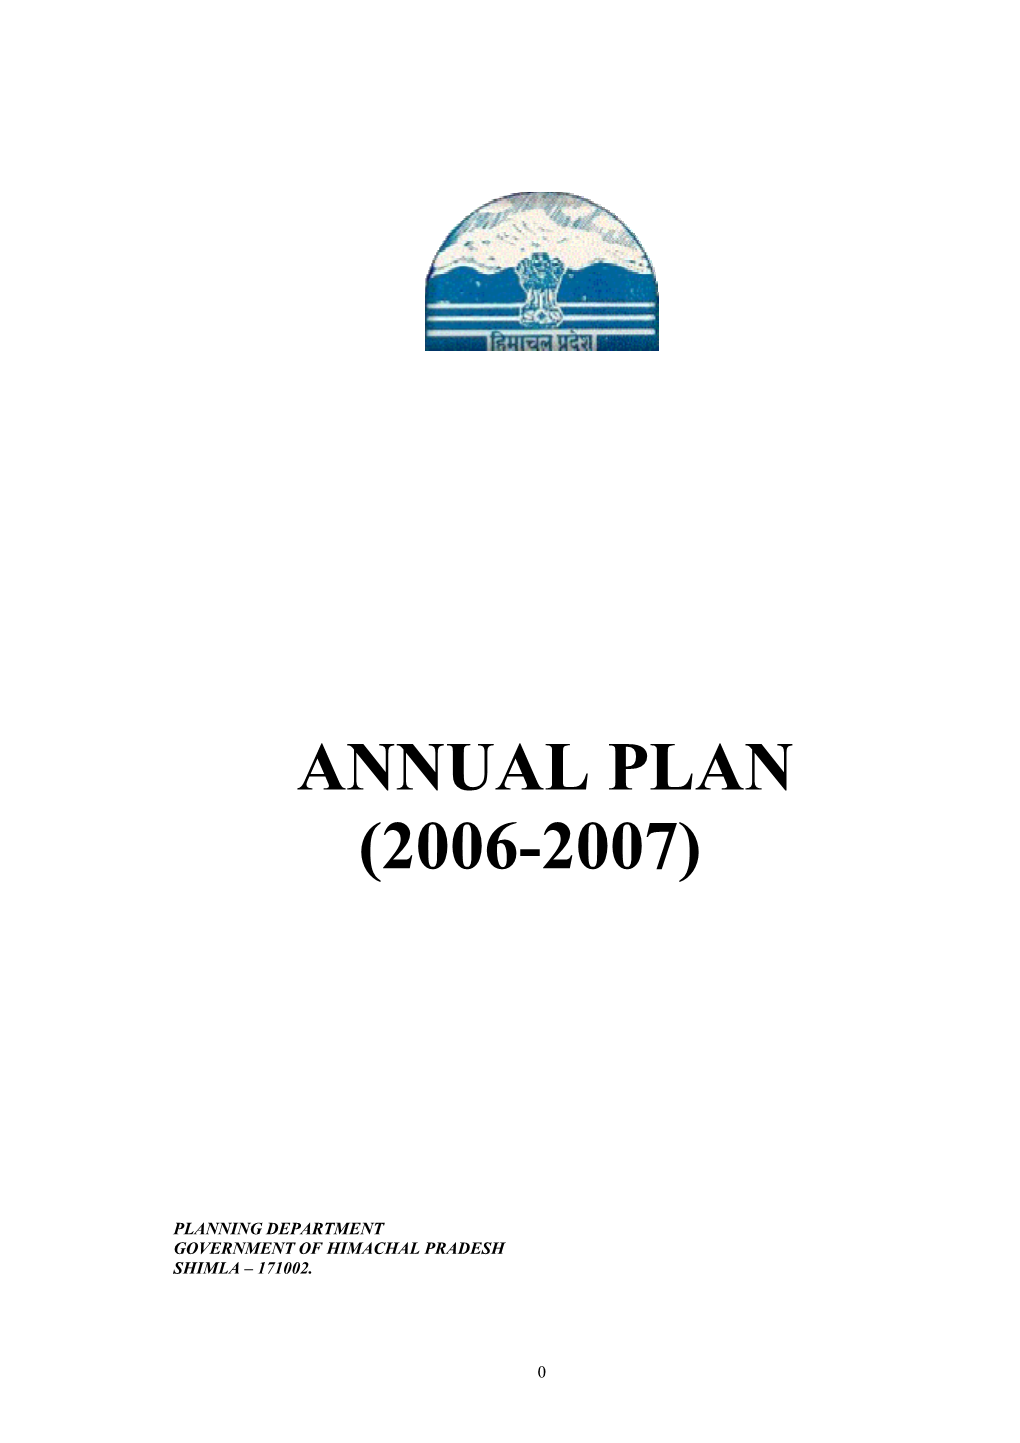 Chapter – I an Overview of State Economy 2-36 Chapter – Ii Review of Annual Plans 2002-03 to 2005-06 37-47